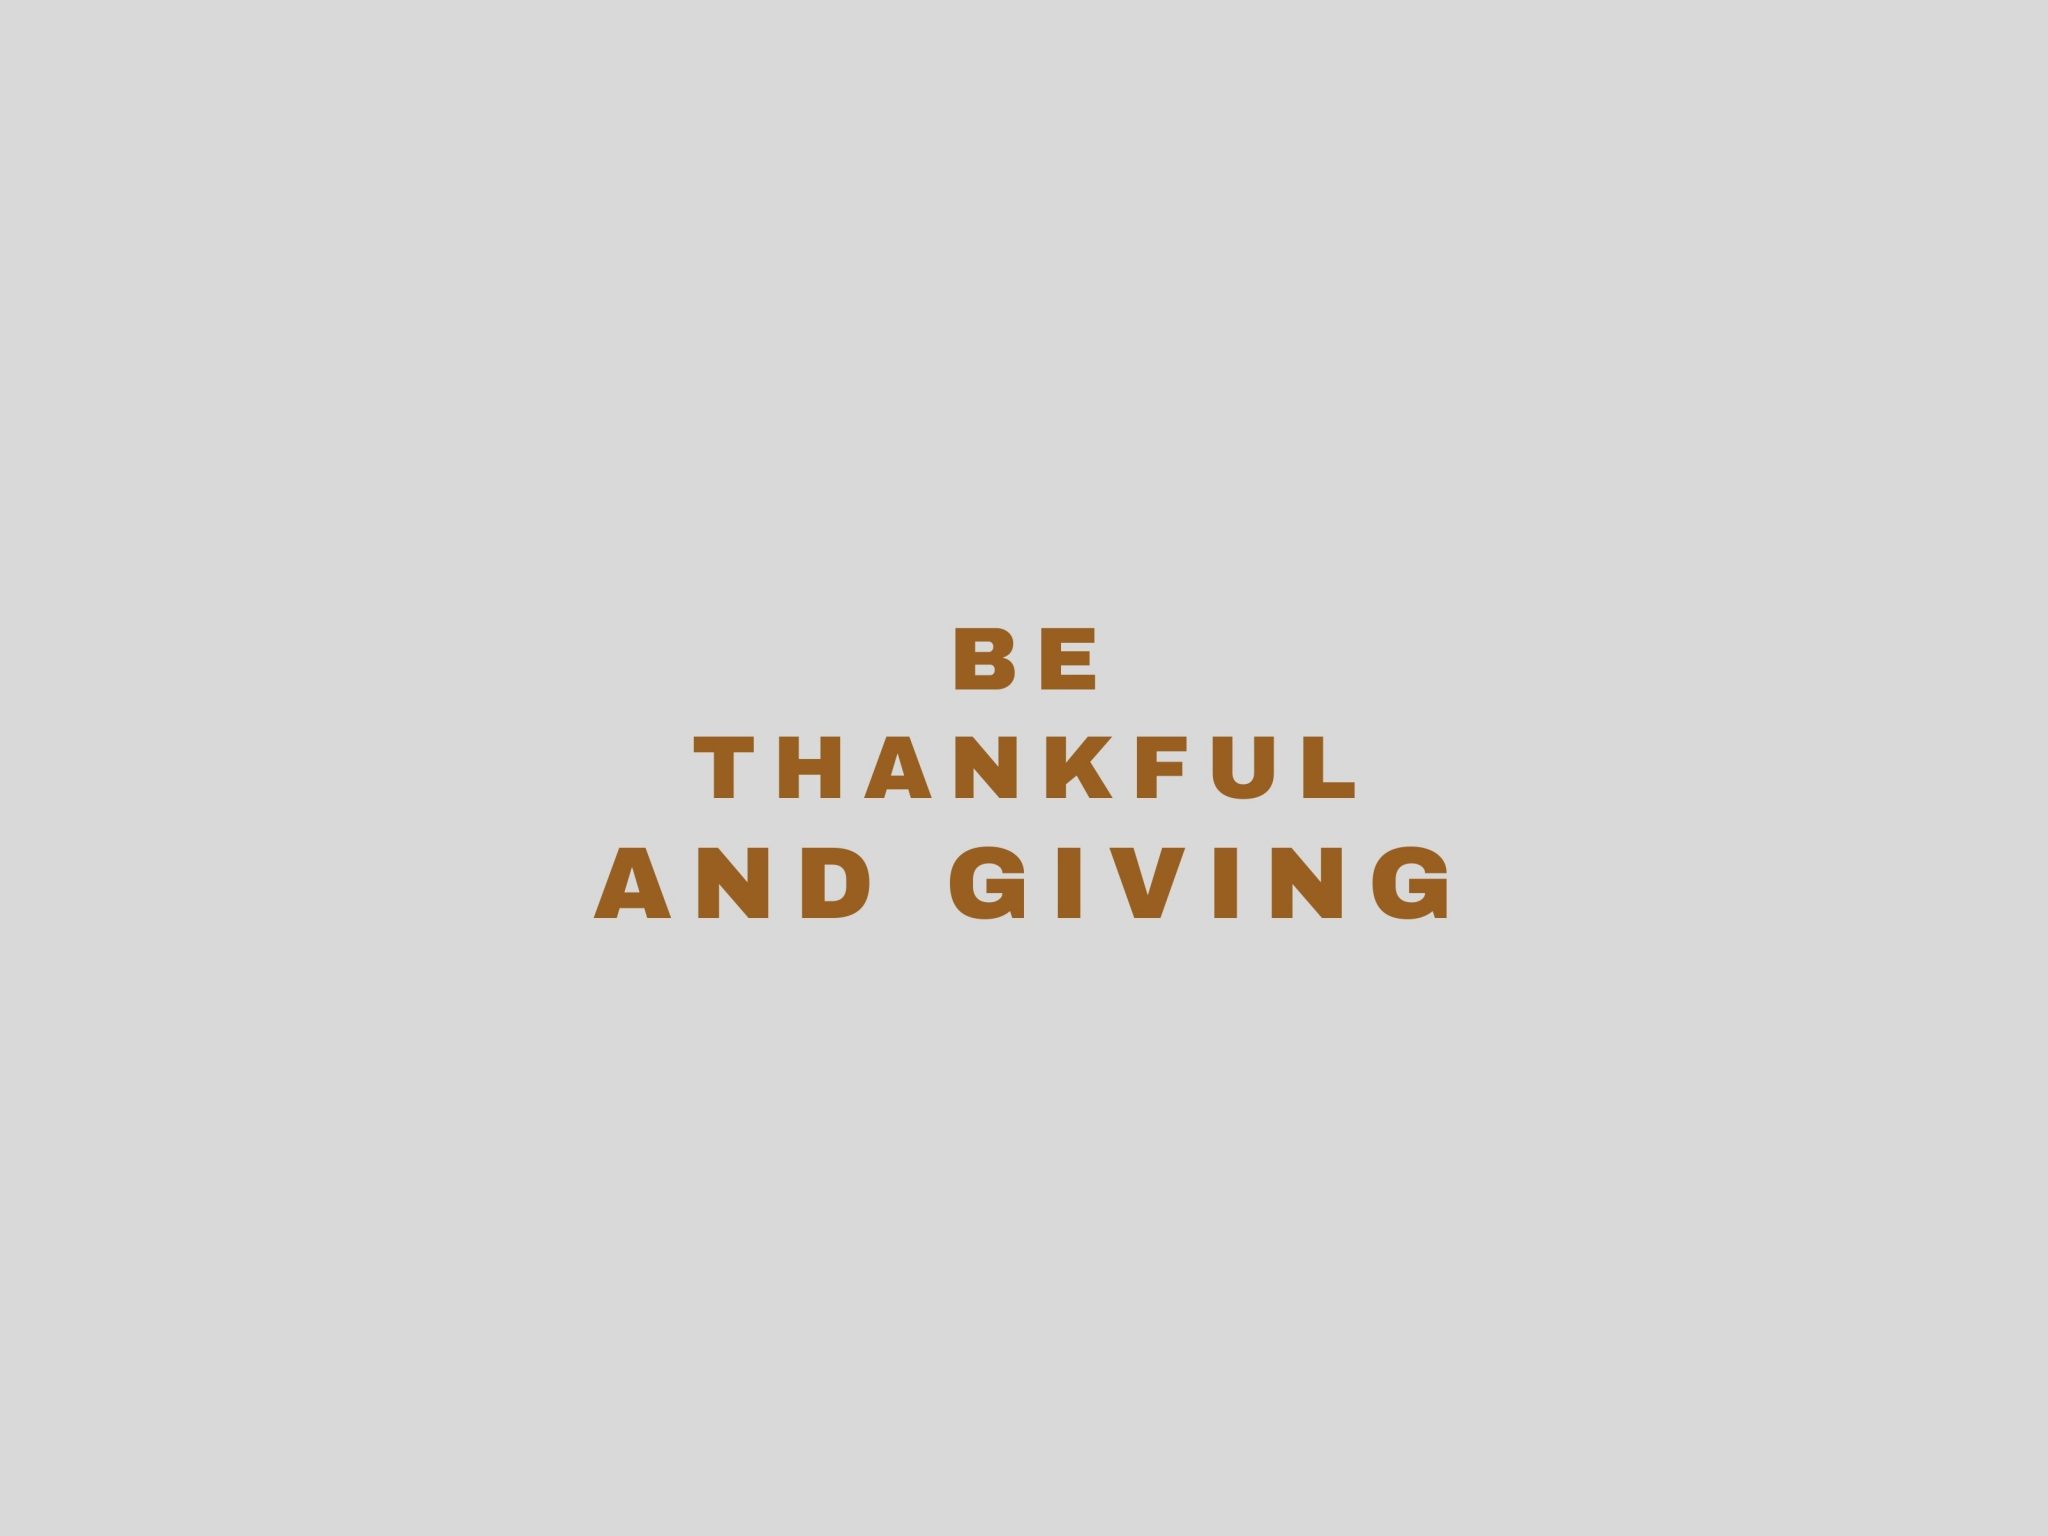 2048x1536 wallpaper Be Thankful and Giving Quote iPad Wallpaper 2048x1536 pixels resolution